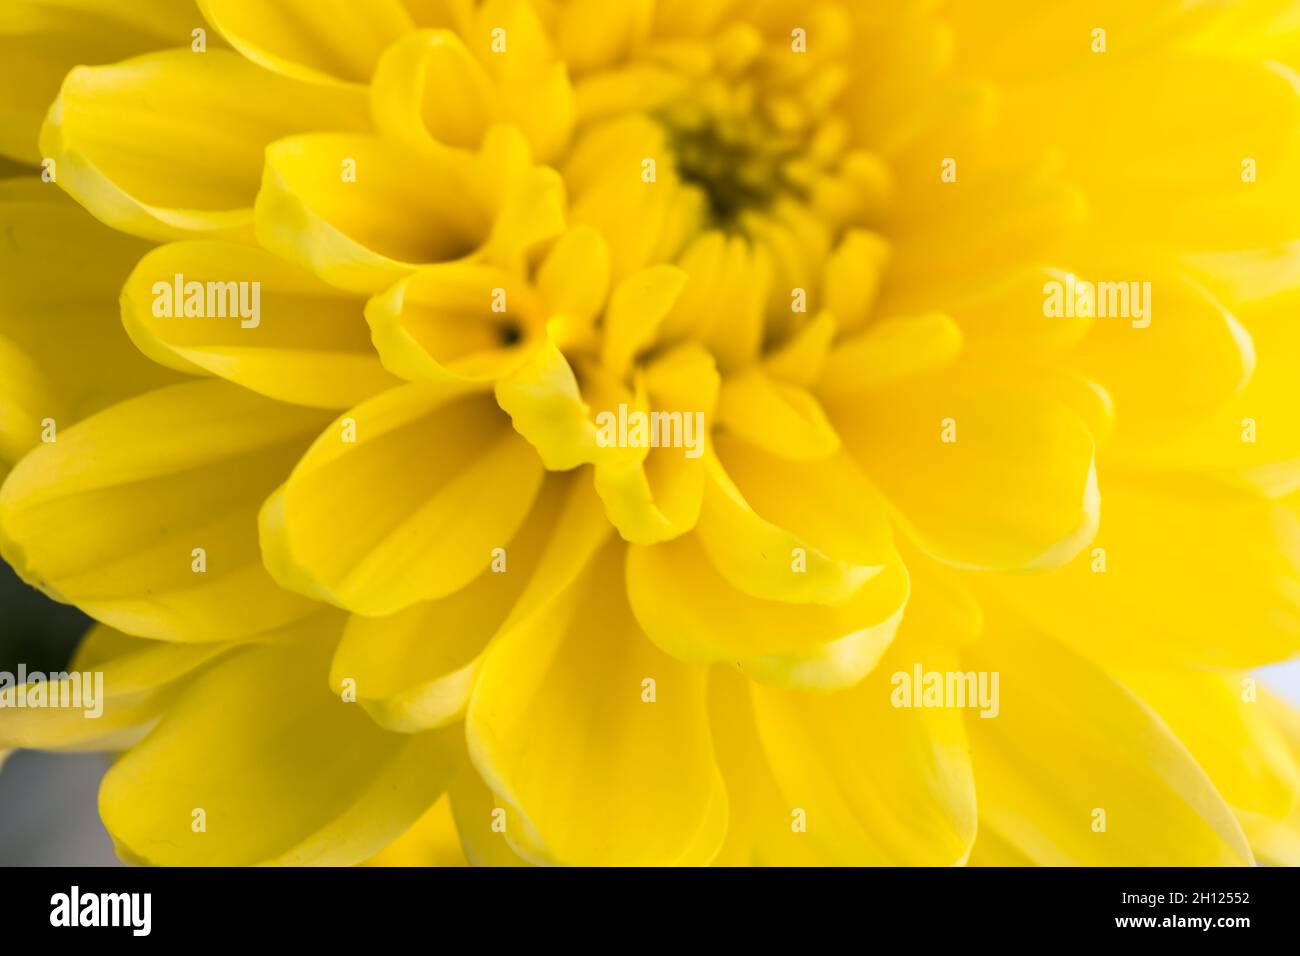 Blurred flower background with amazing yellow chrysanthemums Stock Photo